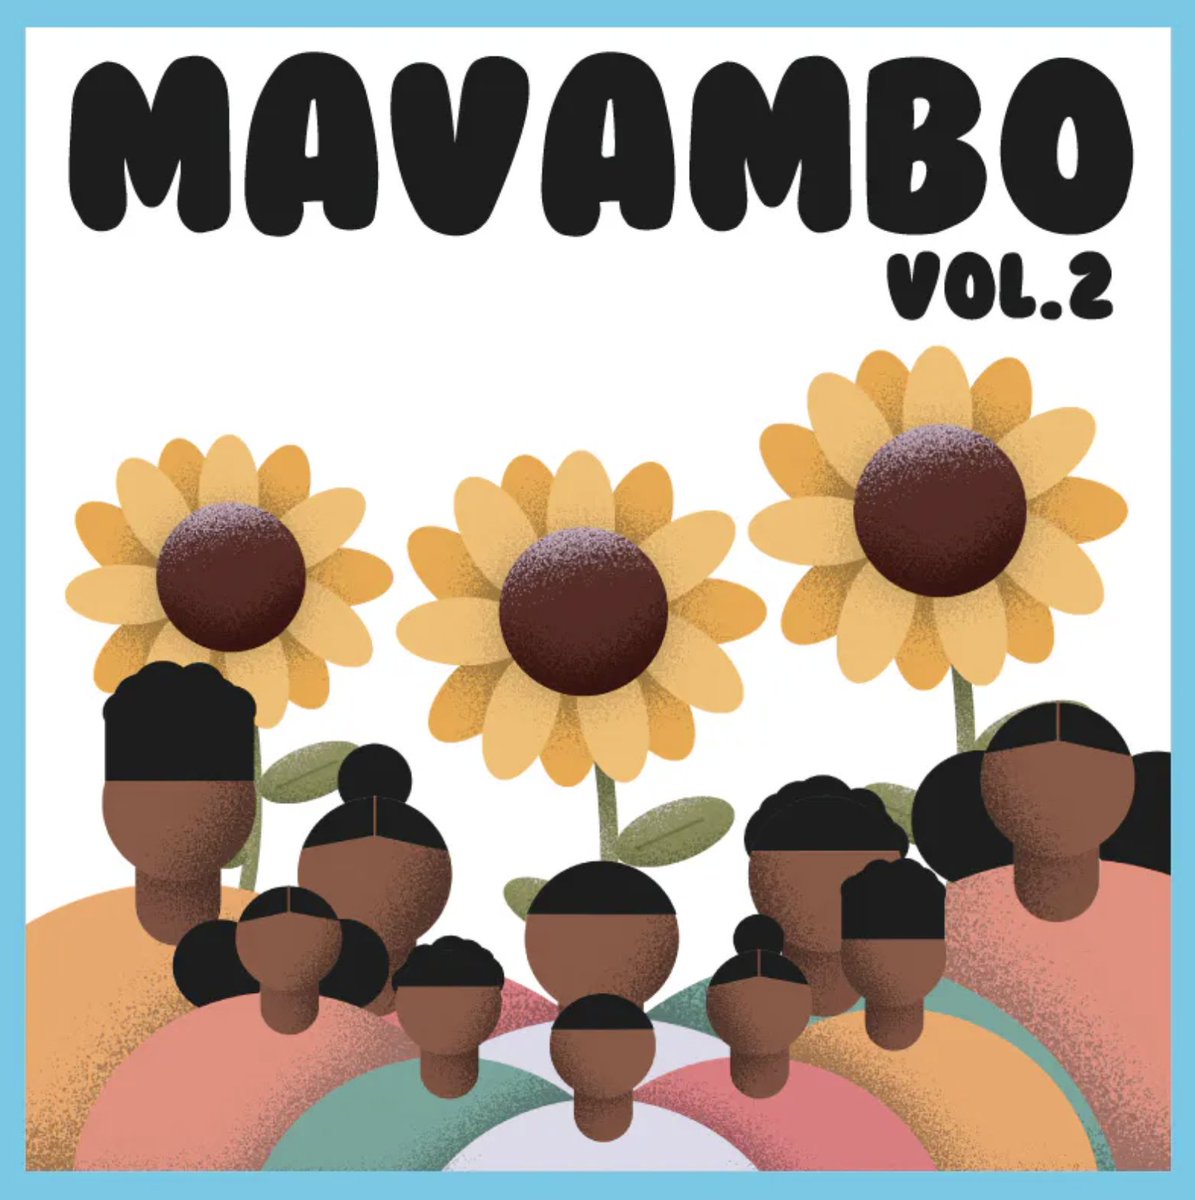 Mavambo (meaning “the beginning” in Shona, one of the official languages of Zimbabwe).

🌻 An artist guild that focuses on fostering community and educating African Talent.

🌻 Over 80+ mints contributed to Mavambo Vol 2 Artists

🌻 Available now on @ourZORA

⬇️⬇️⬇️